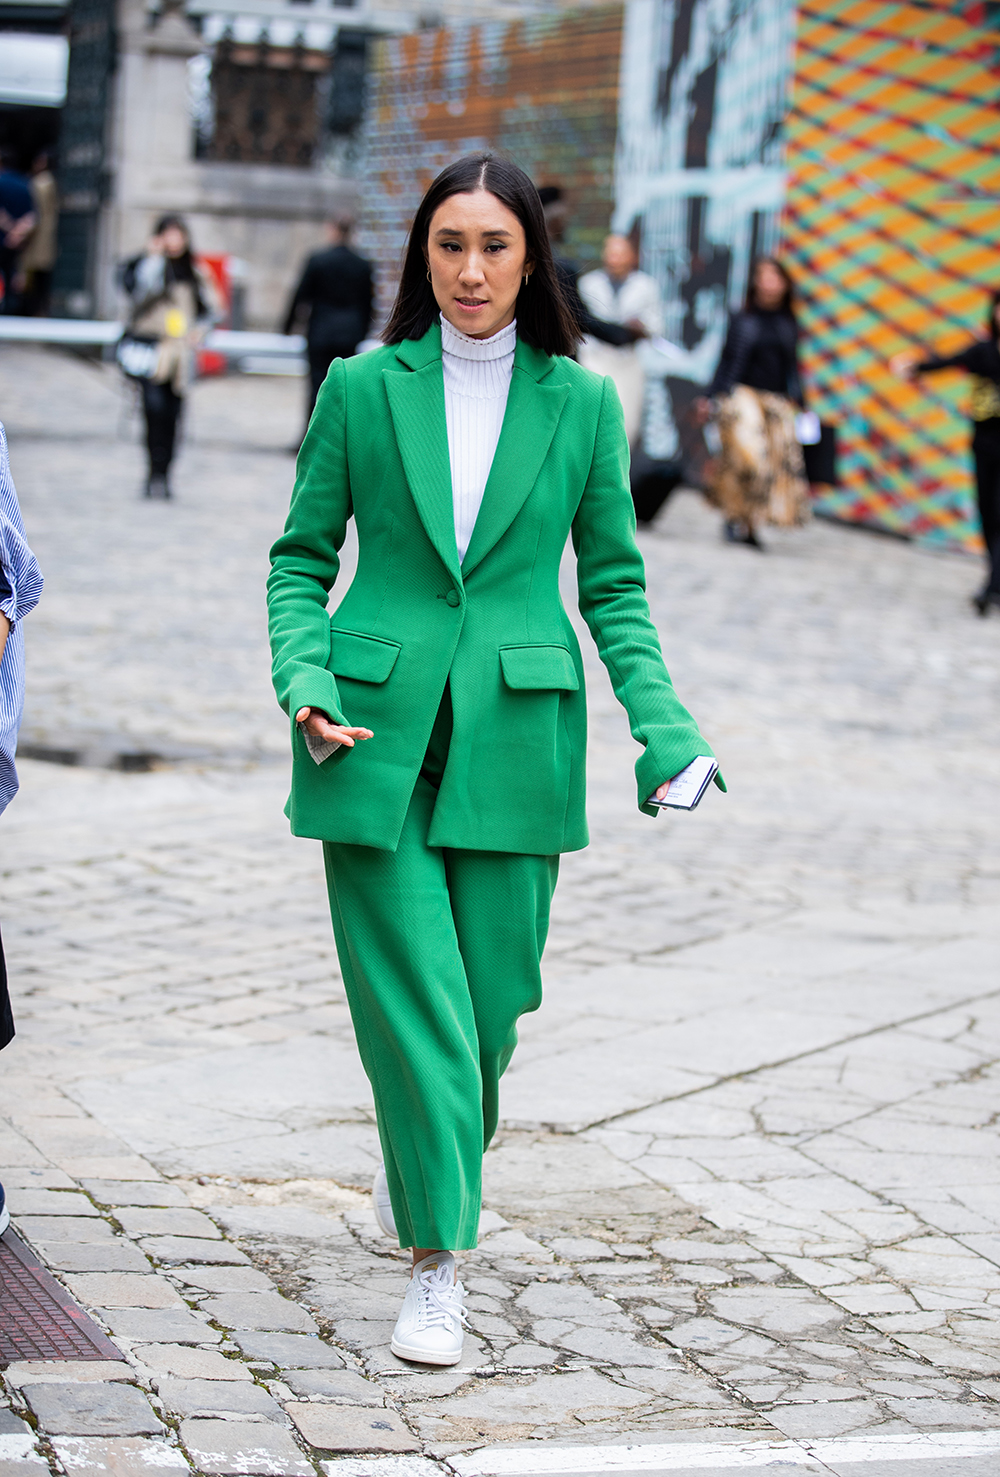 PARIS, FRANCE - SEPTEMBER 29: Eva Chen seen wearing green suit outside Thom Browne during Paris Fashion Week Womenswear Spring Summer 2020 on September 29, 2019 in Paris, France. (Photo by Christian Vierig/Getty Images)